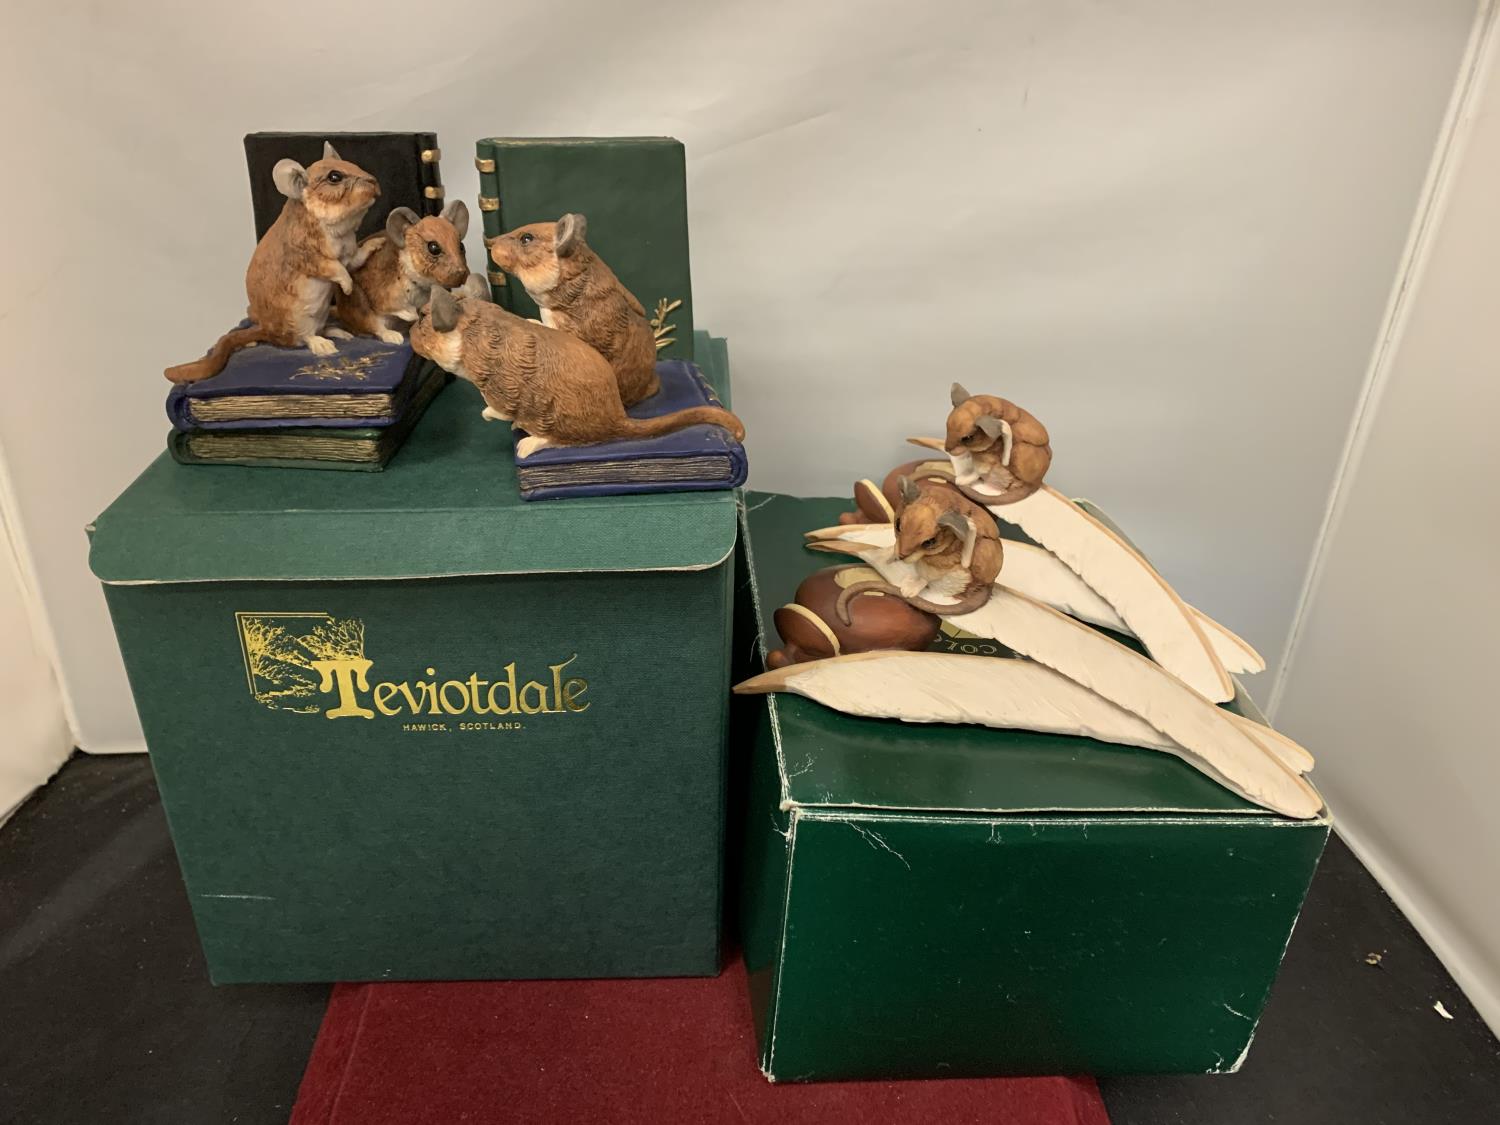 A PAIR OF TEVIOTDALE MOUSE THEMED BOOK ENDS AND TWO FIGURINES OF MICE WITH QUILLS IN BOXES (NOT